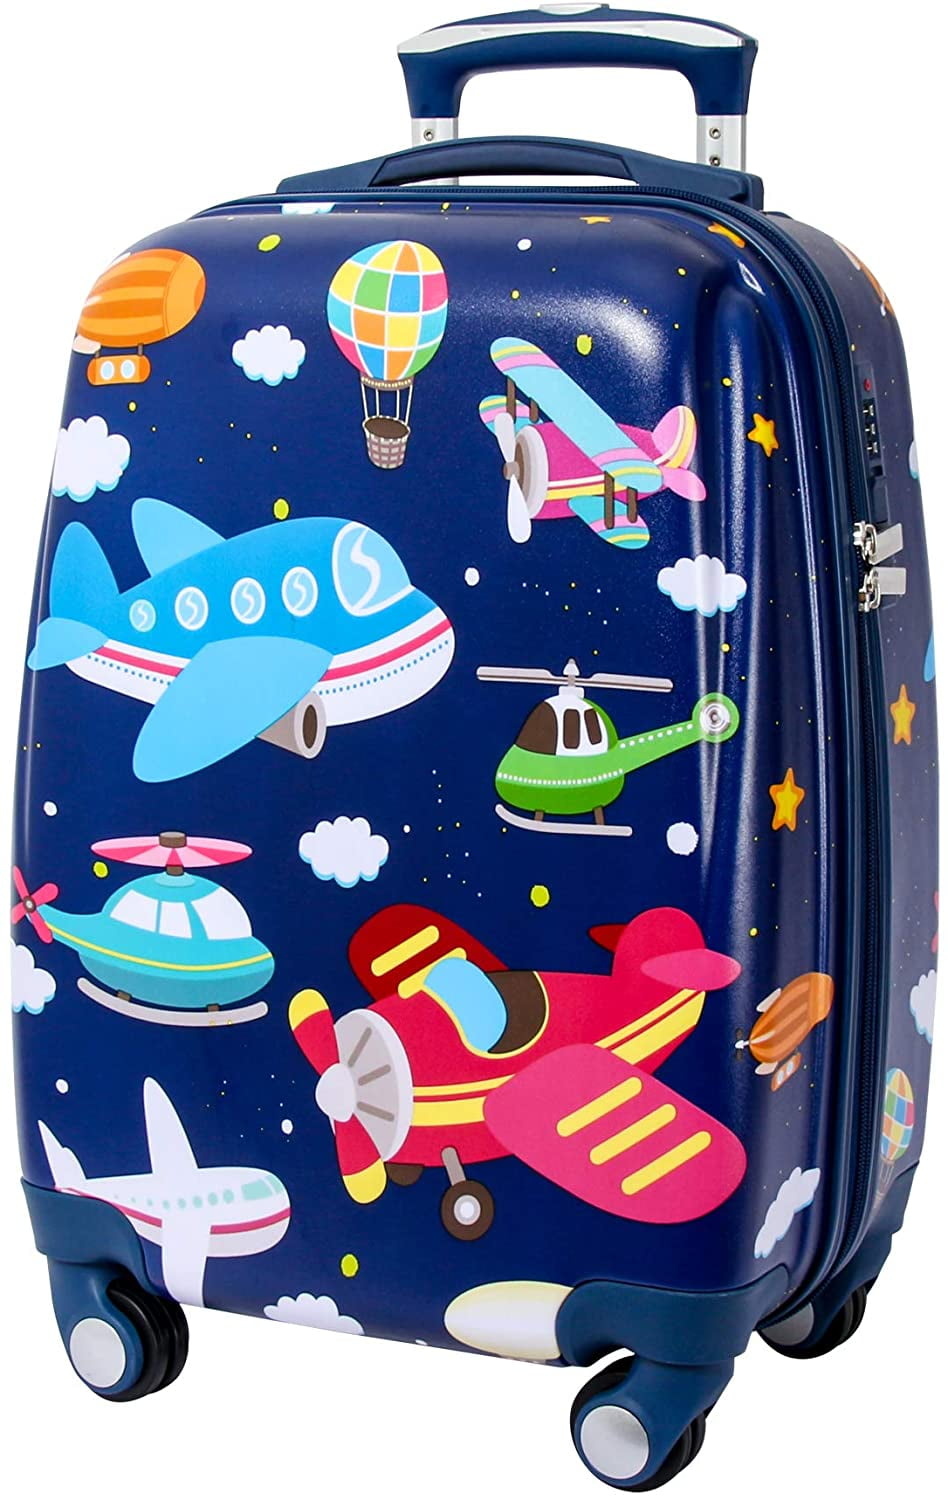 GURHODVO Kids Luggage Kids' Suitcase For Boys 18 inch Polycarbonate Carry  On Luggage Lovely Dinosaur Hard Shell 